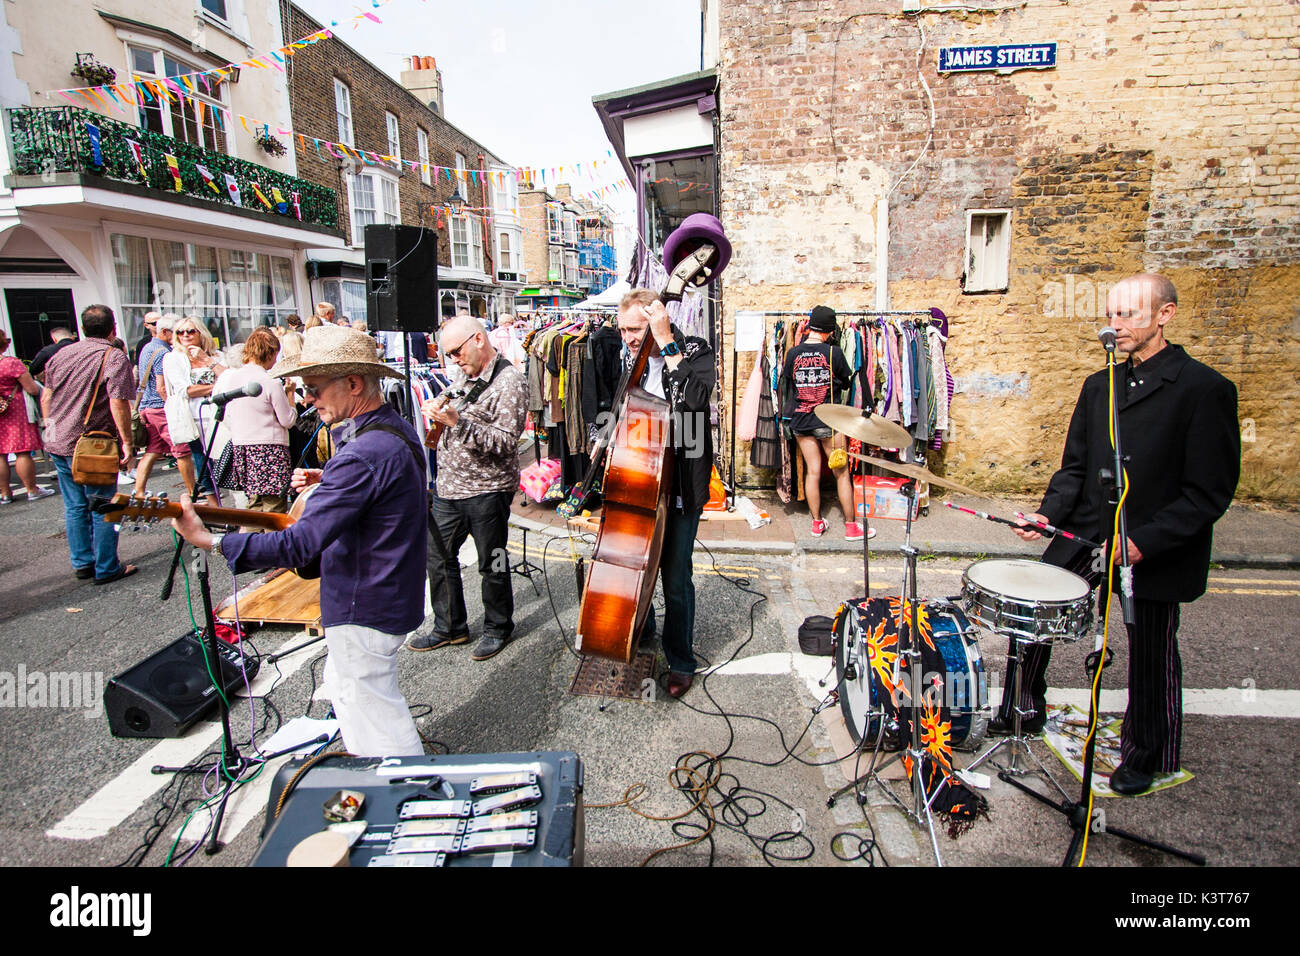 Event, Addington street Fair at Ramsgate, local skiffle group, High Chaparrals, performs in front of people on street junction. Bunting hanging from buildings. Street busy with people. Stock Photo